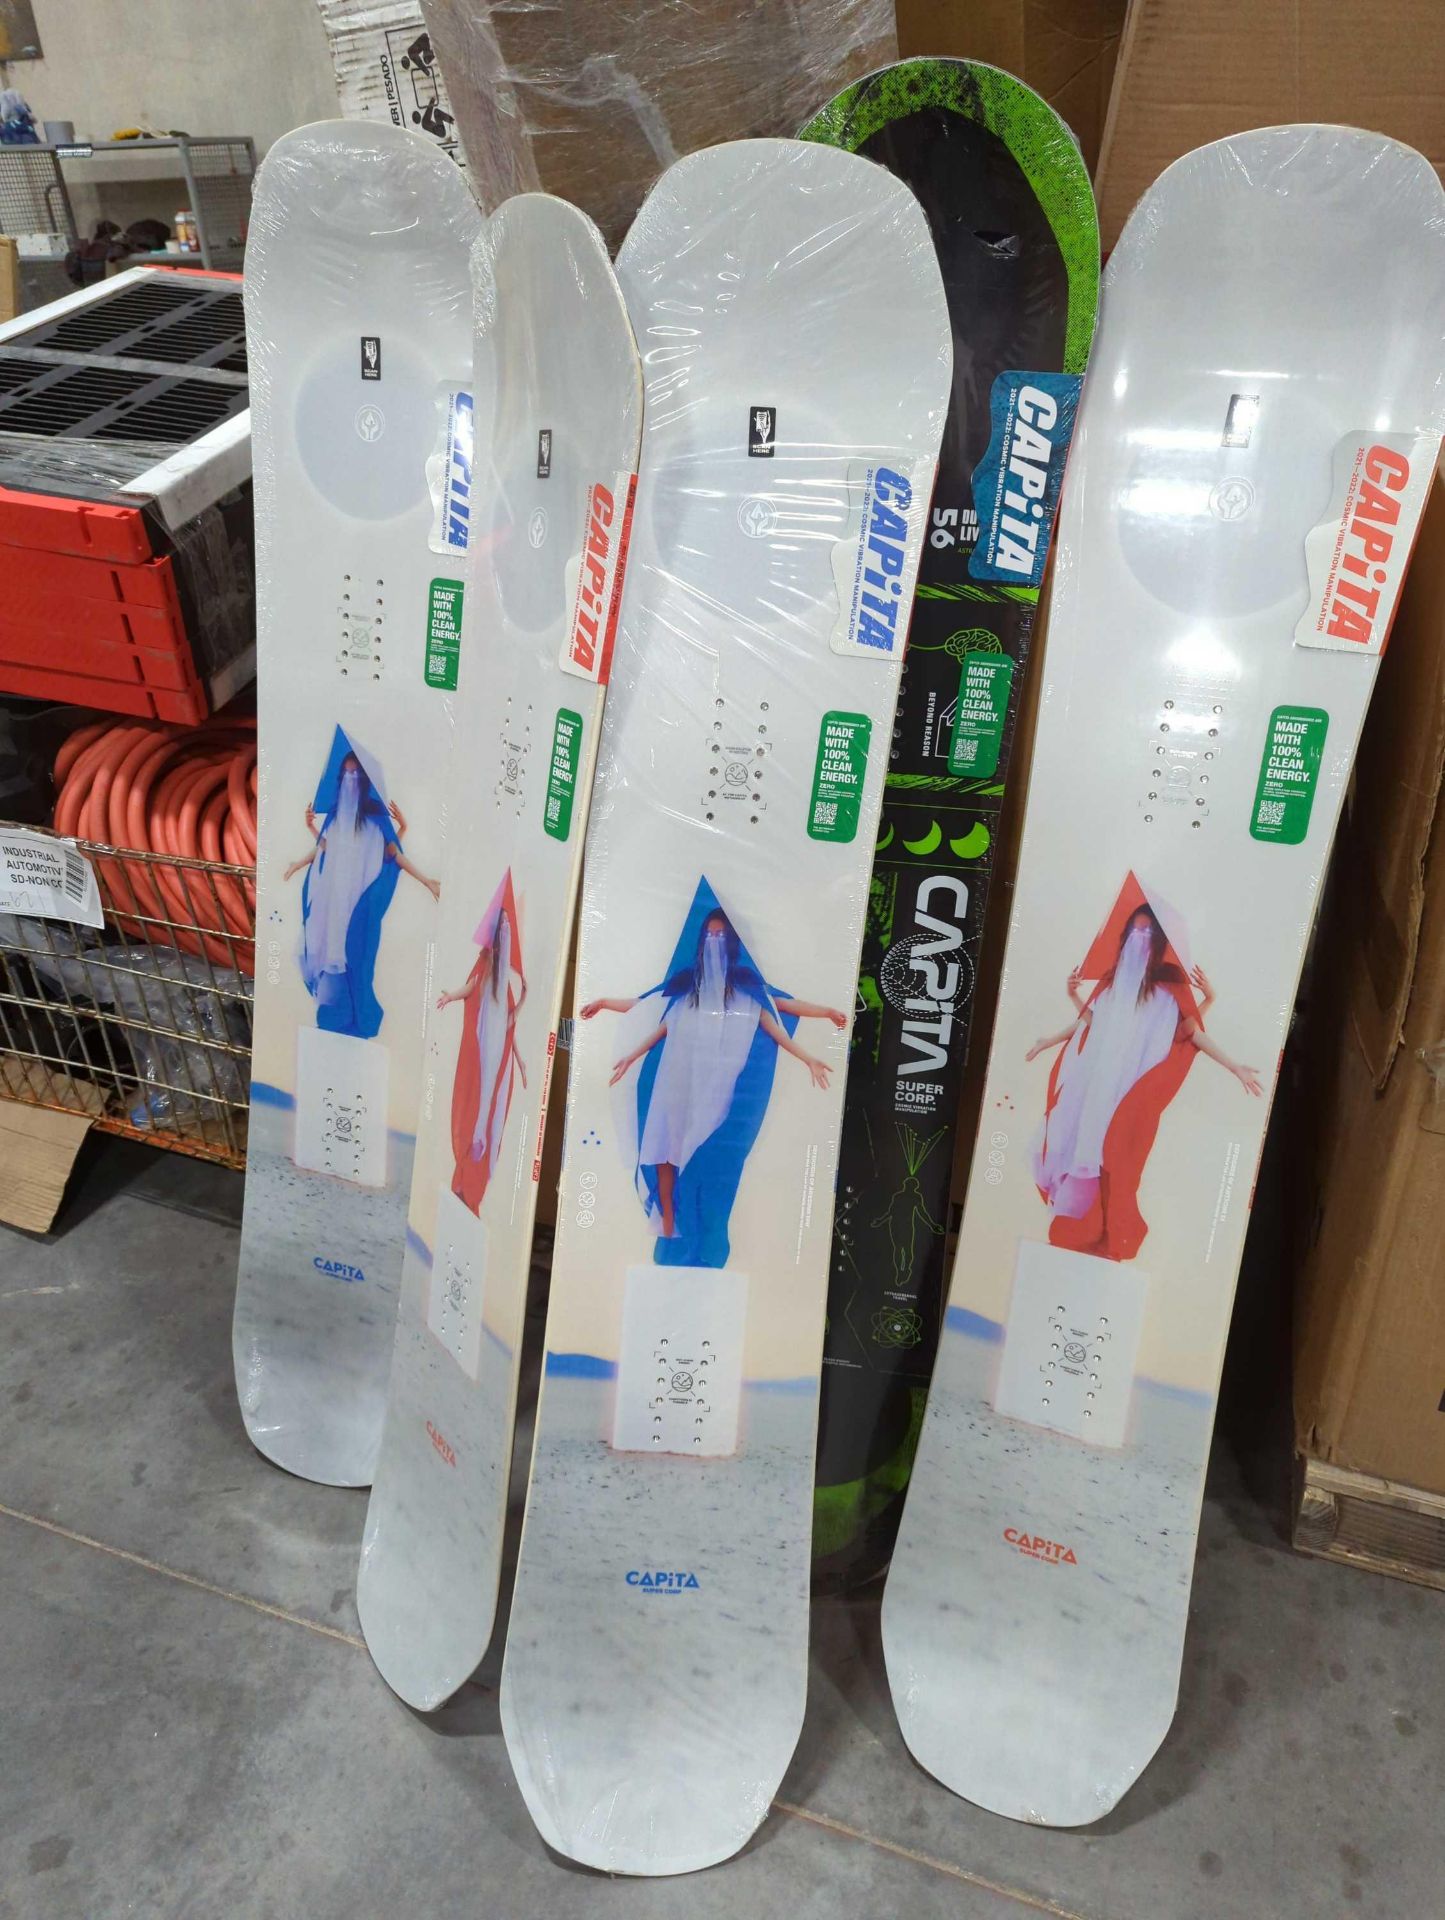 Gaylord of talls snowboards go rhino products and more